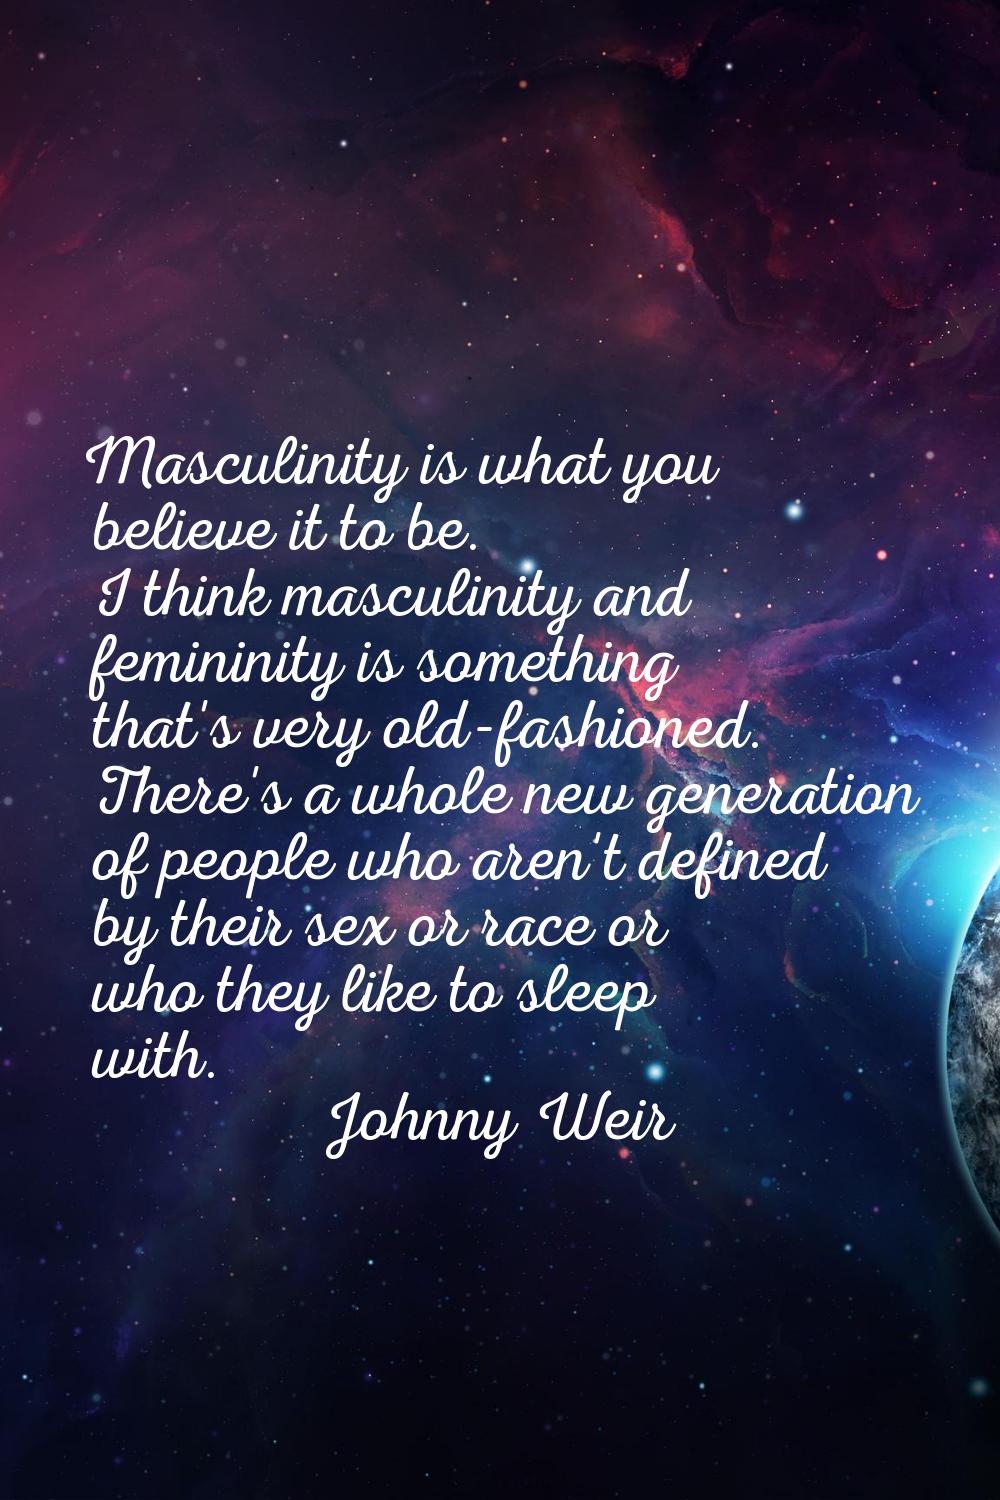 Masculinity is what you believe it to be. I think masculinity and femininity is something that's ve